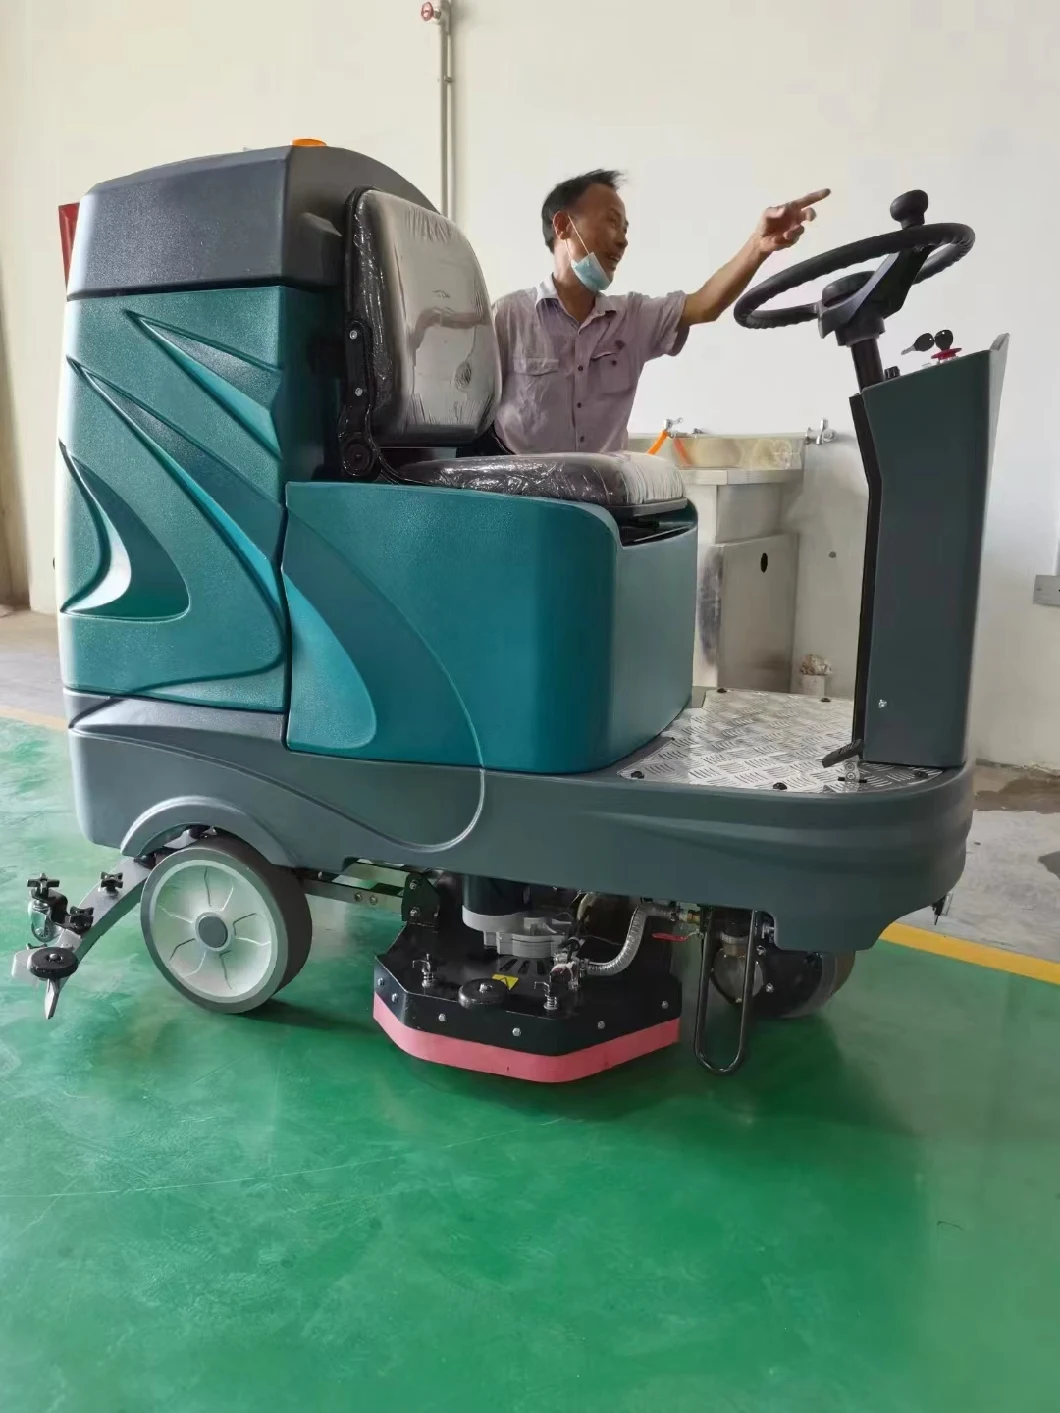 Wholesale Cheap Price Robotic Sweep Vacuum Cleaner Electric Floor Sweeper Scrubber Machine